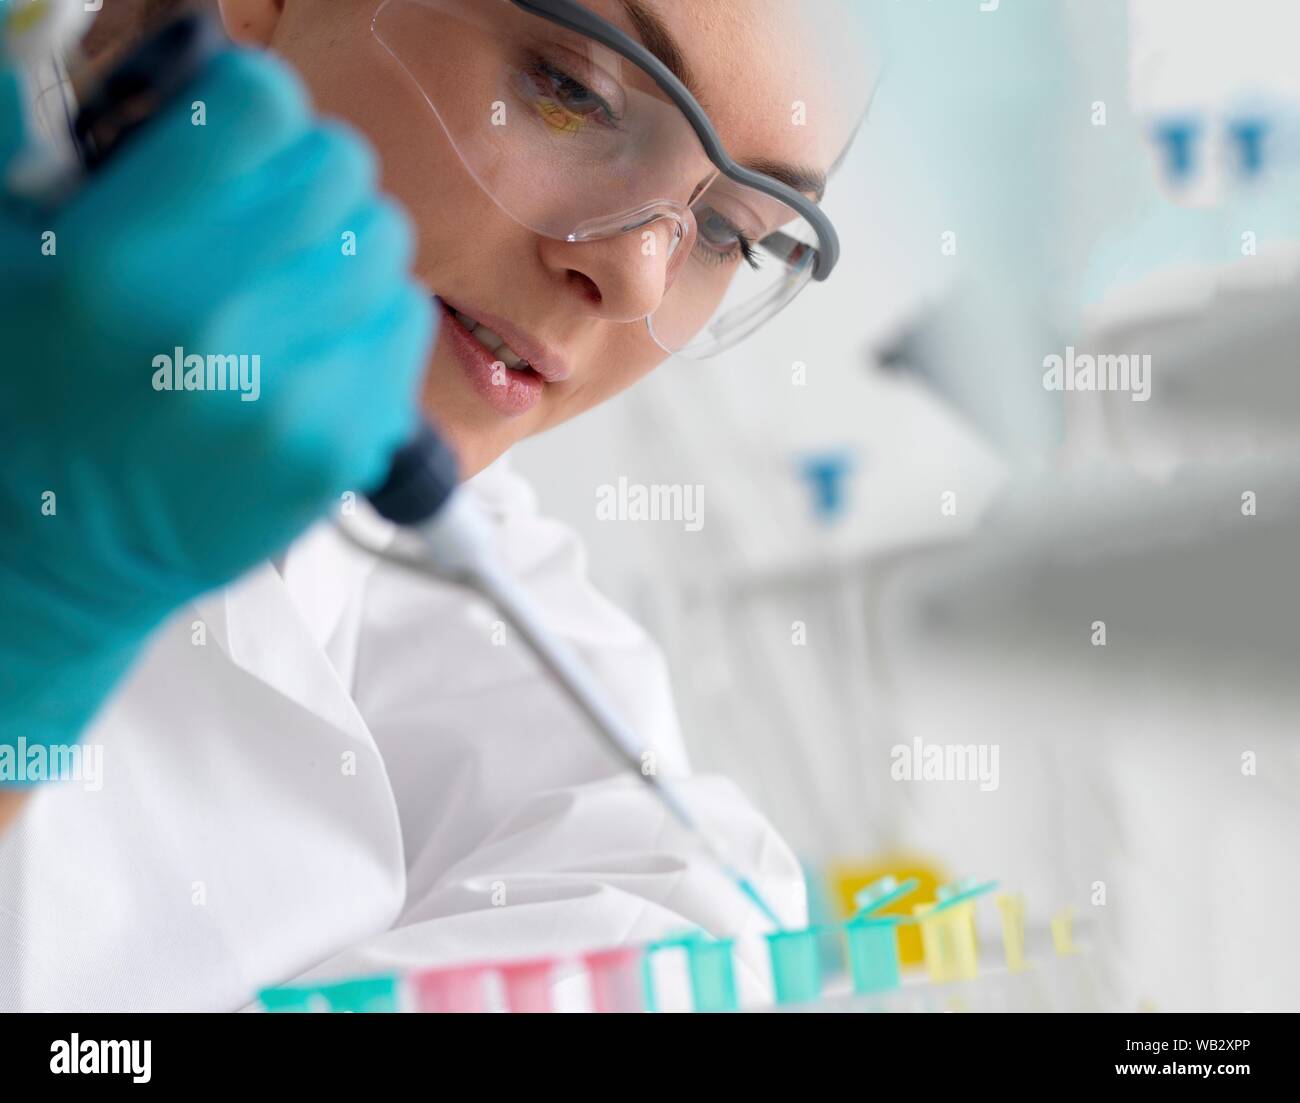 Biotechnology research. Scientist pipetting sample into a microcentrifuge tube ready for automated analysis. Stock Photo